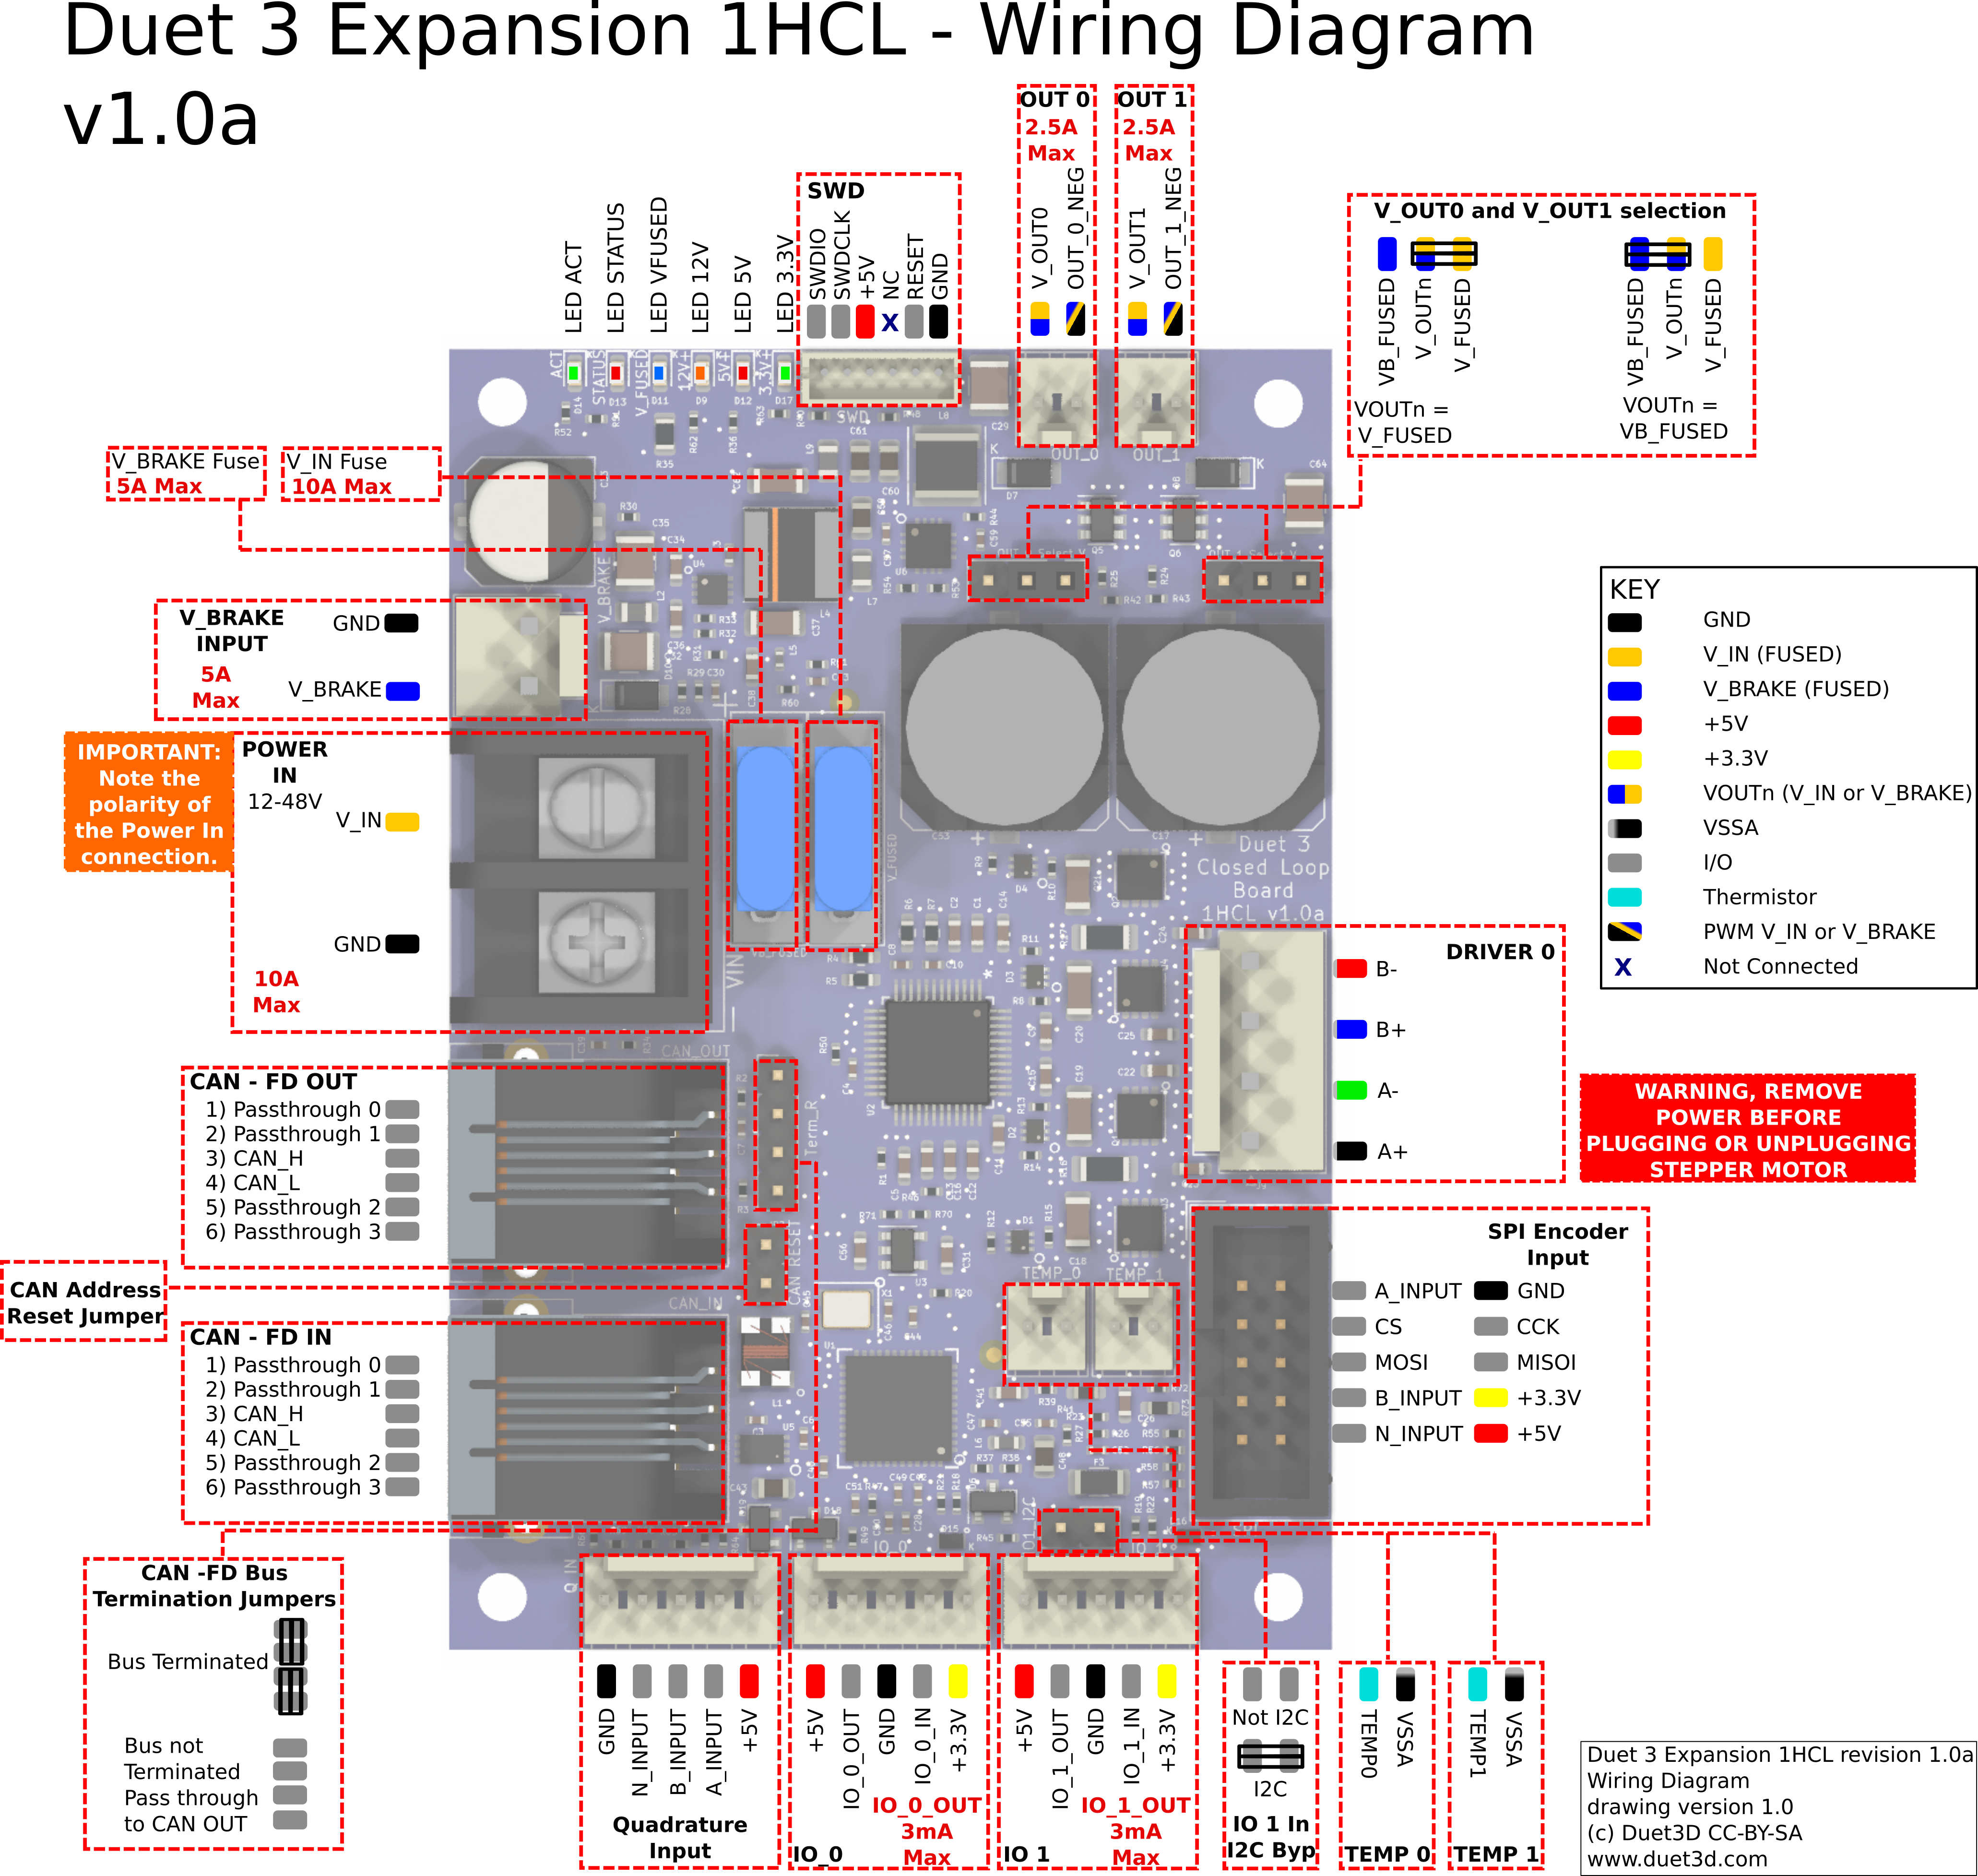 Image showing all the connections on a Duet 3 1HCL to aid wiring